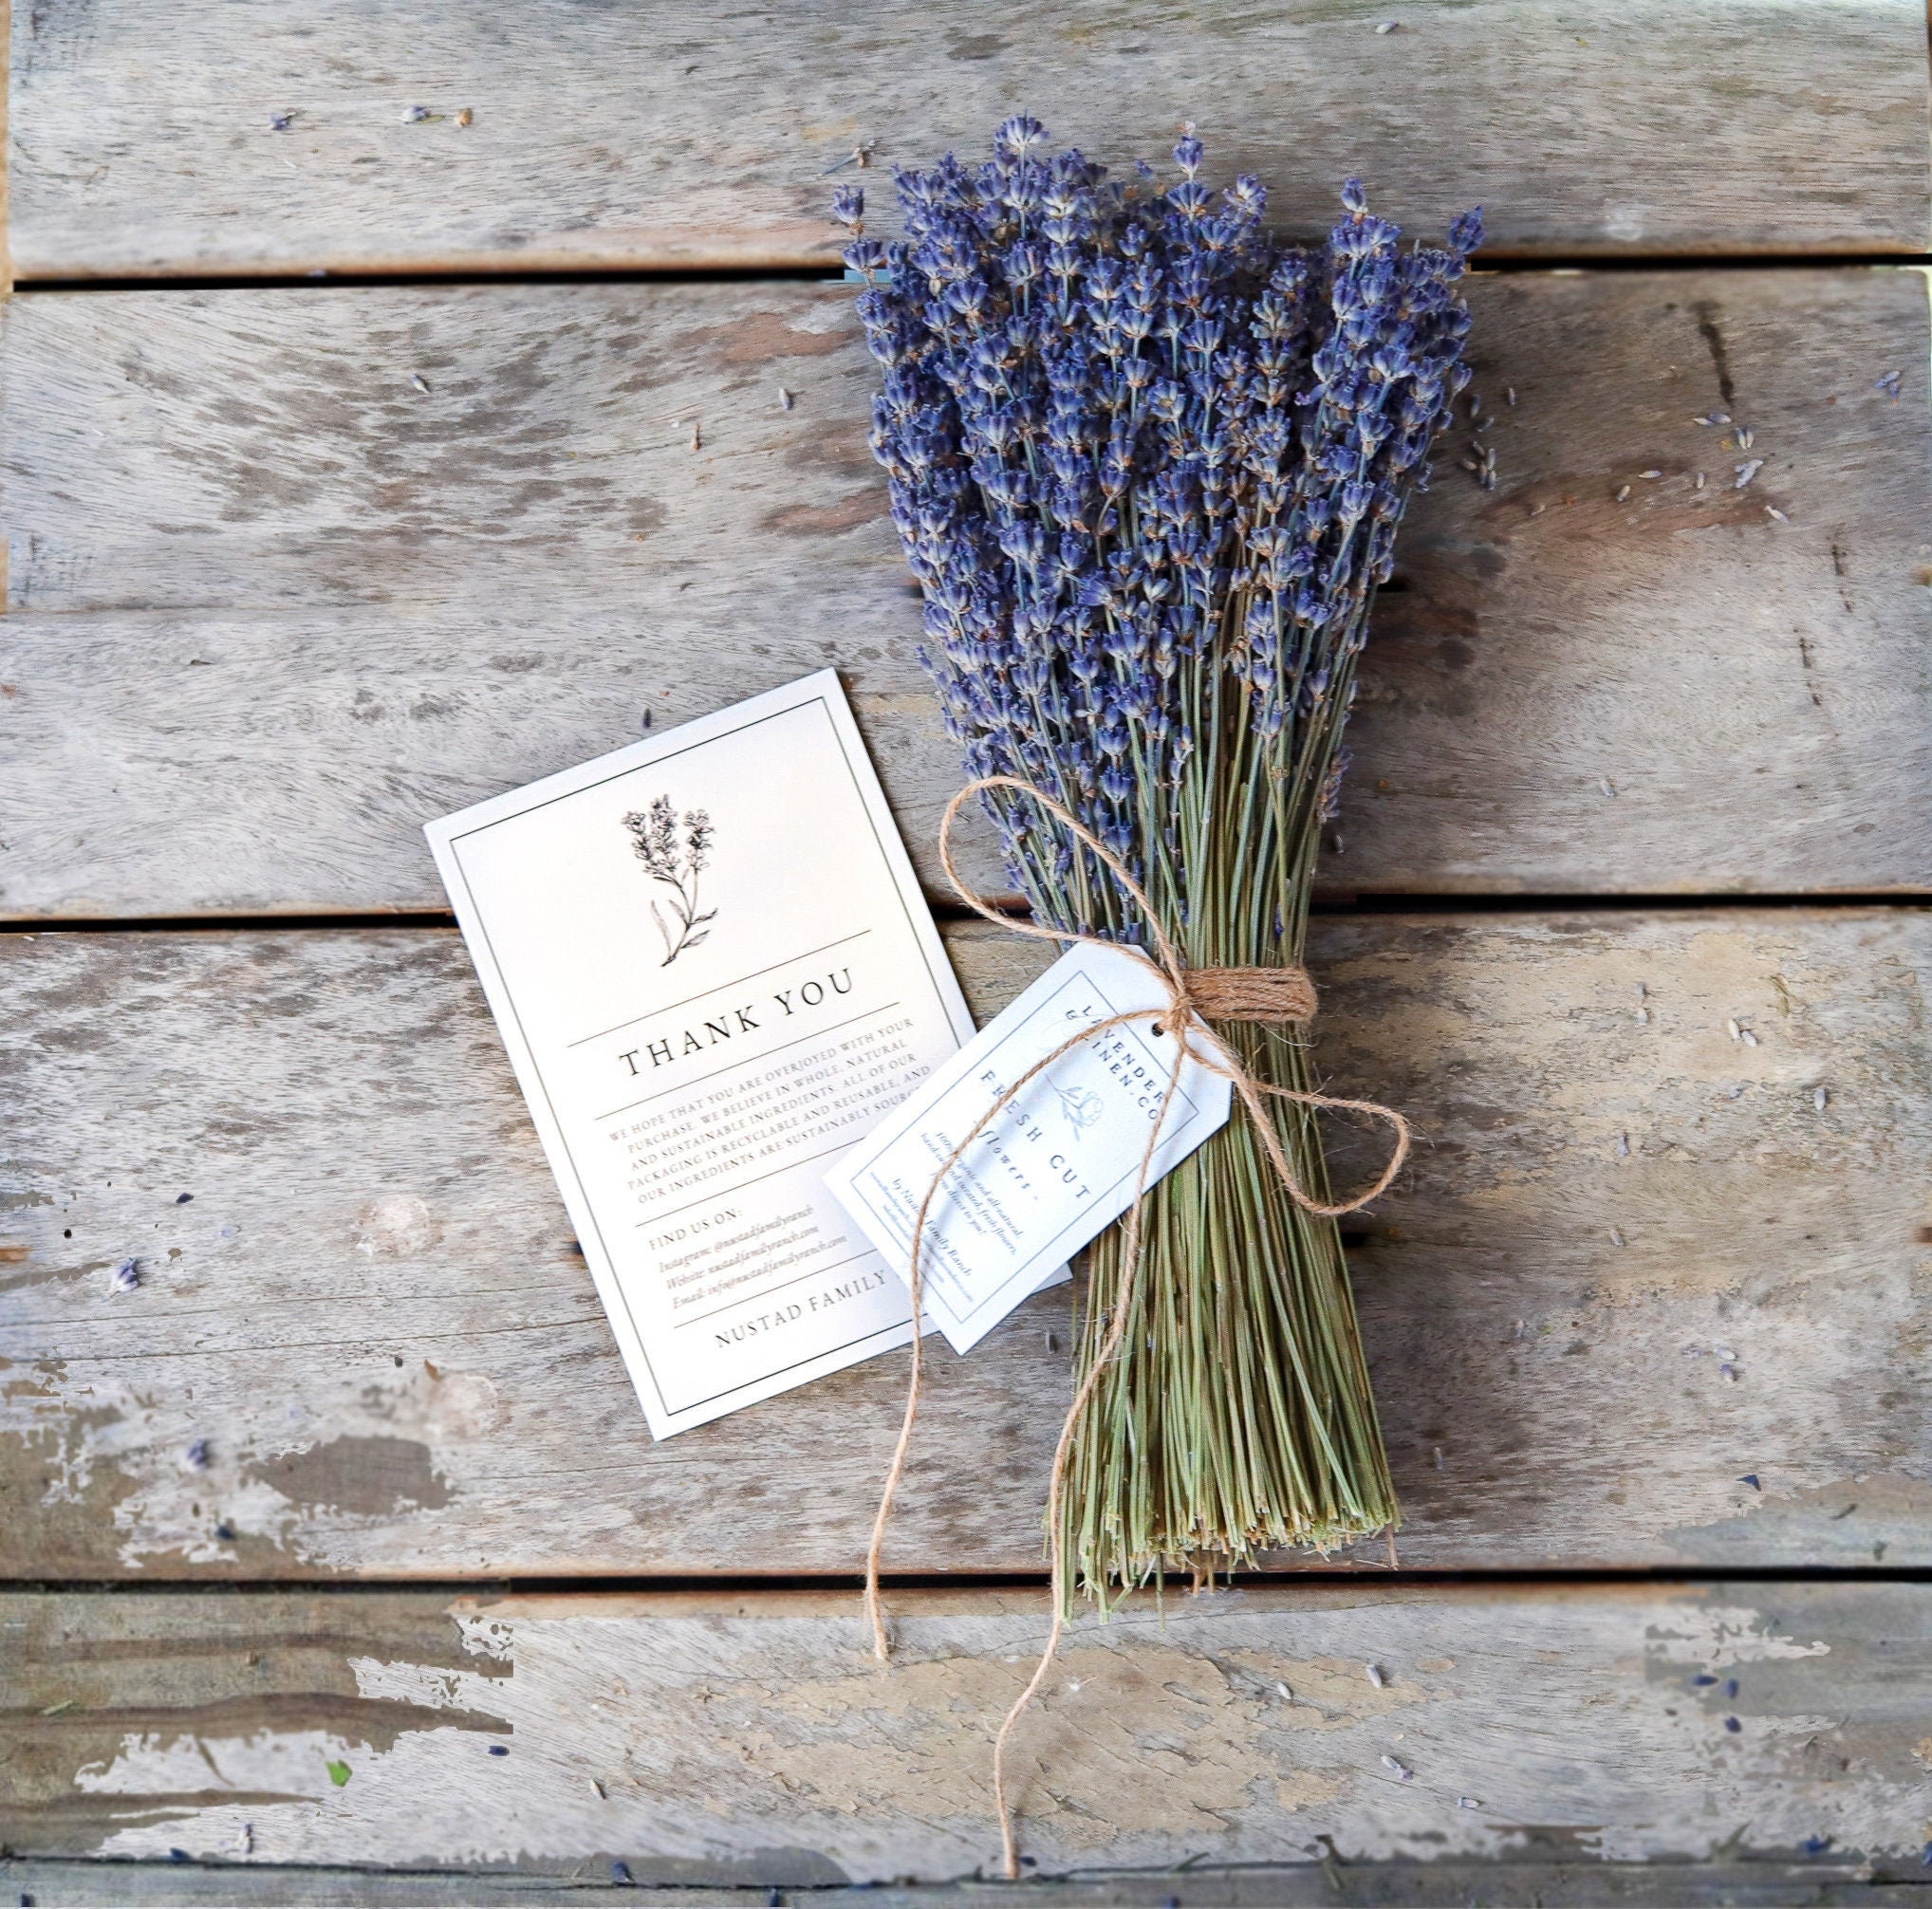 Dried Mixed Lavender Bunch - Set of 2